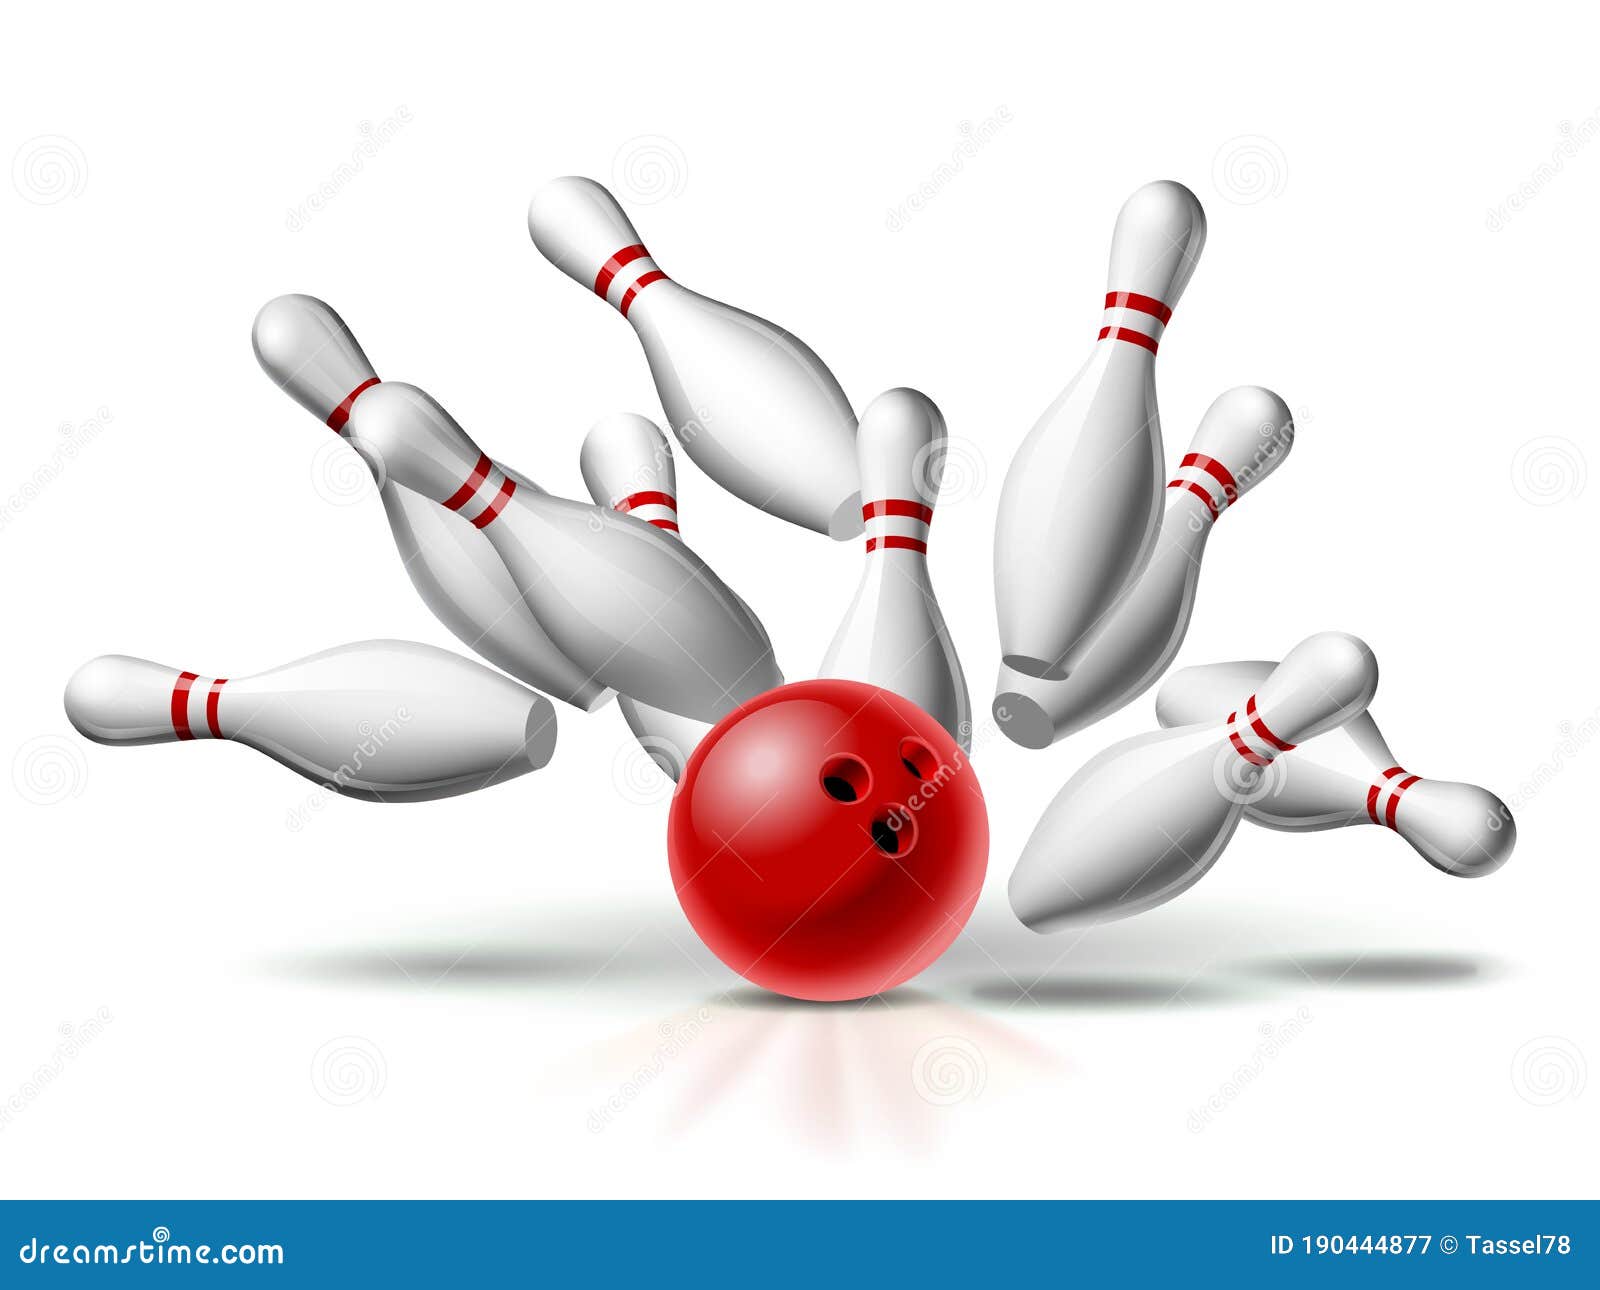 red bowling ball crashing into the pins.  of bowling strike  on white background.